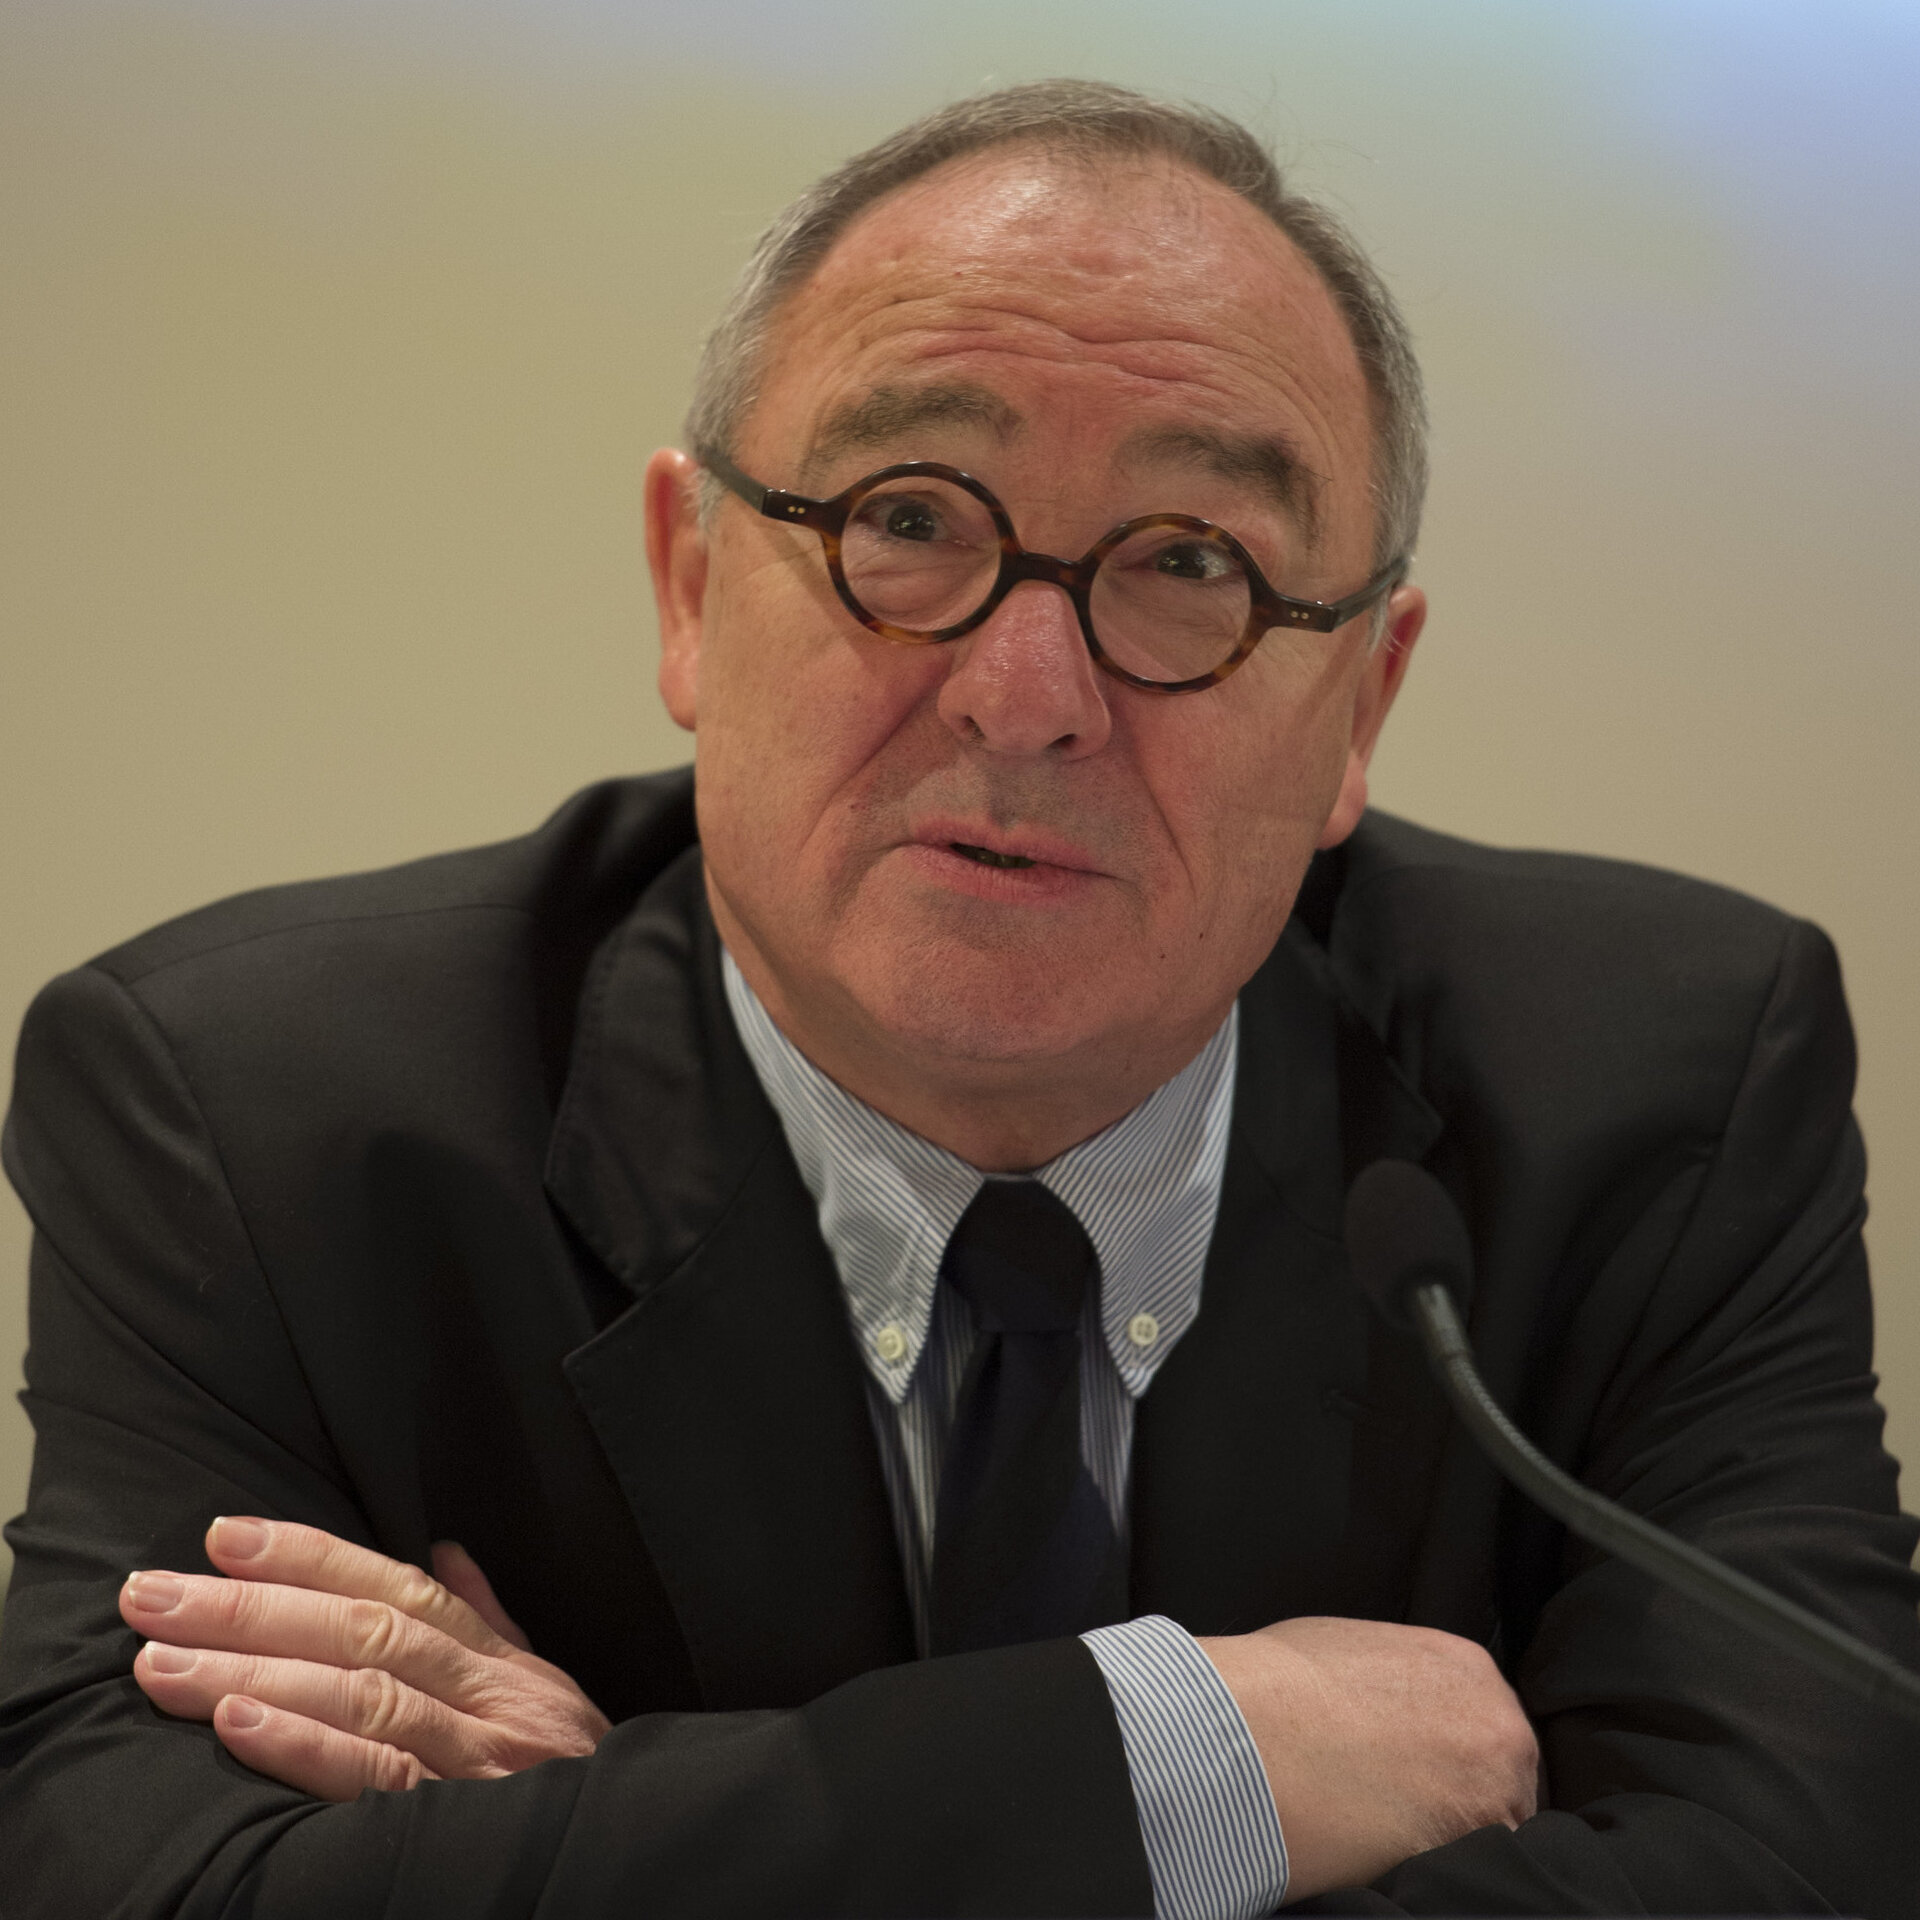 Jean-Jacques Dordain during the annual press briefing on 24 January 2013